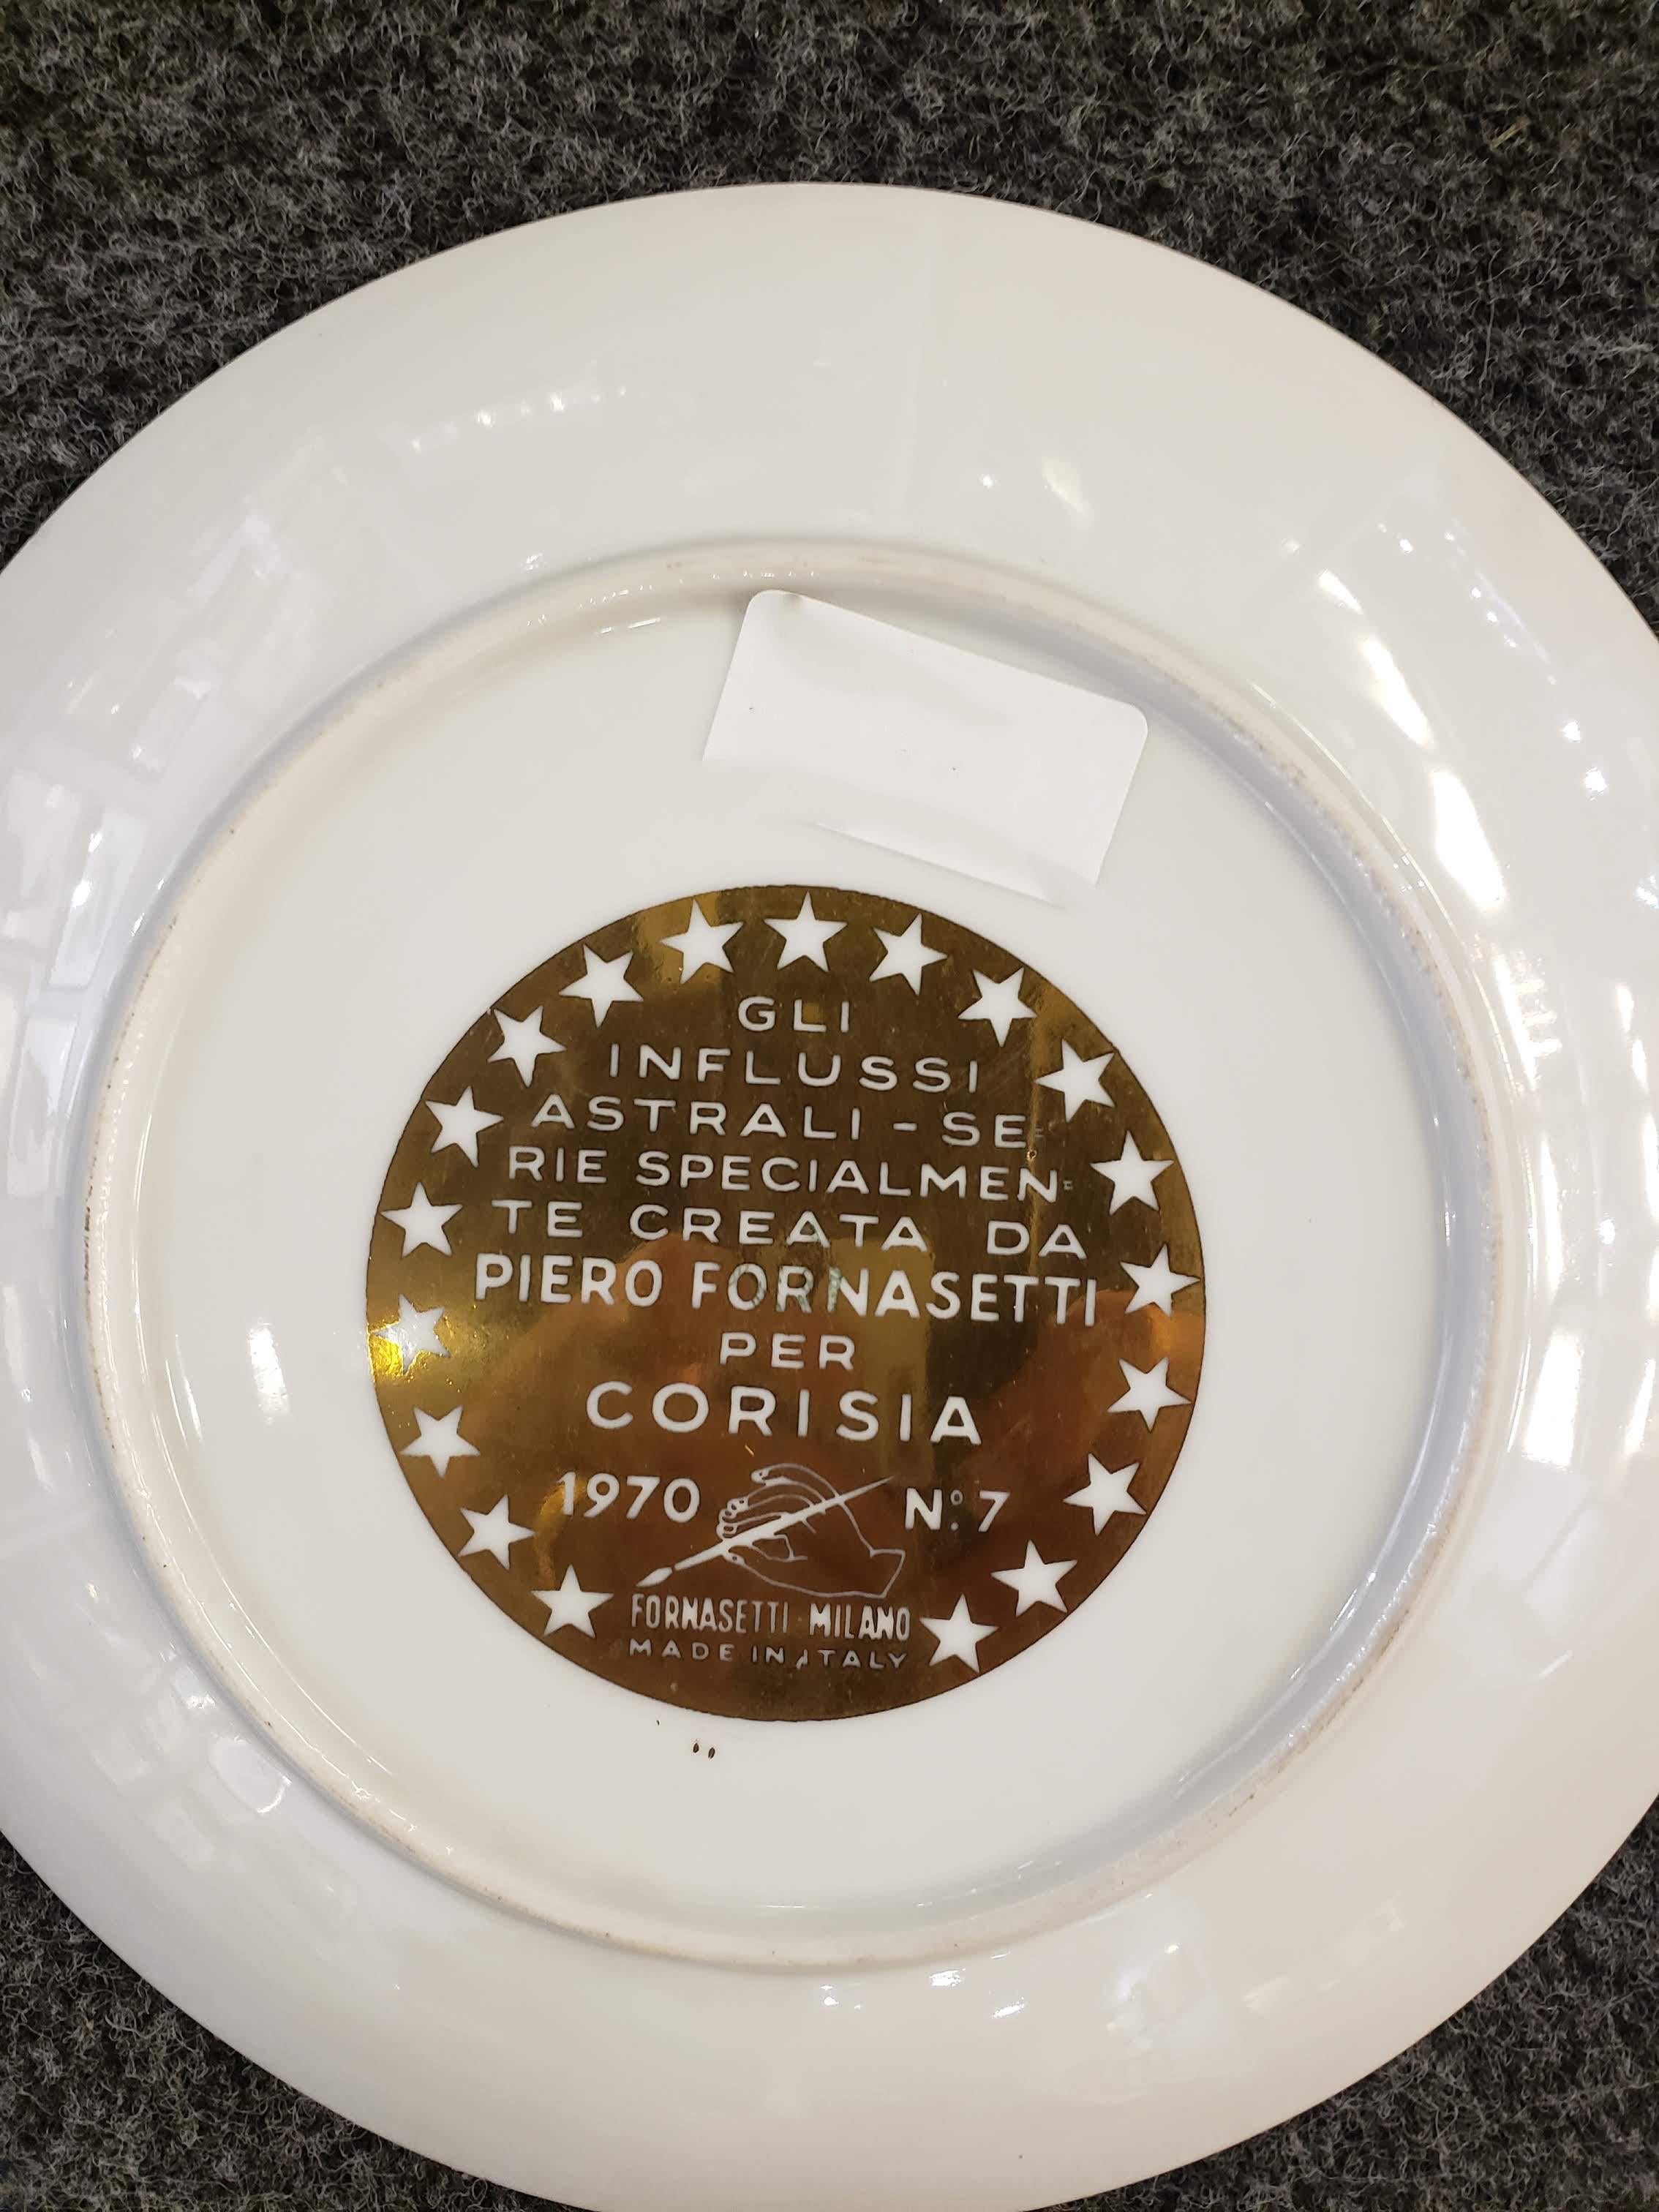 Piero Fornasetti Libra zodiac porcelain plate made for Corisia in 1970.

The plate in black and gold depicts the astrological sign Libra with words, intertwined around the form of hanging scales, with characteristics of the sign. This series of